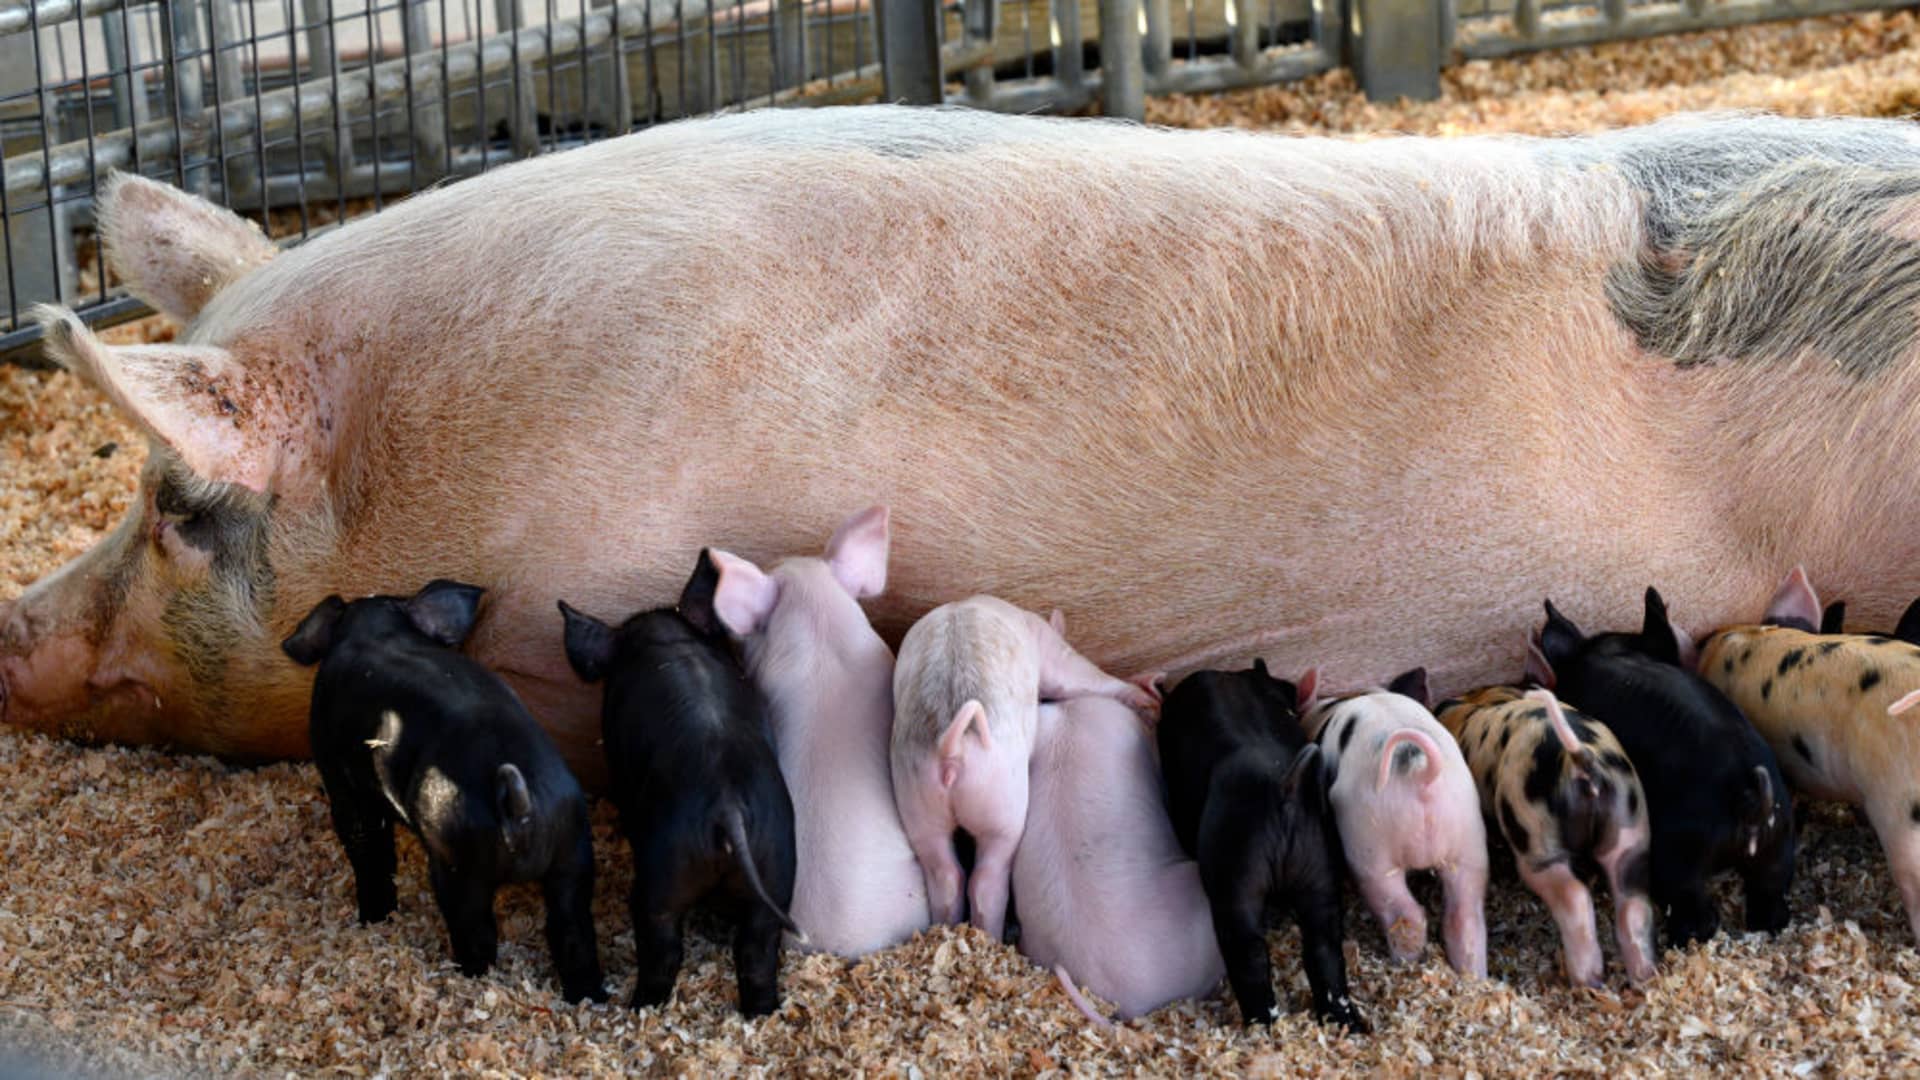 Piglets gathering around a sow for feeding at Centennial Farm in California. Proposition 12 is a law prohibiting the confinement of pregnant sows in tiny enclosures.